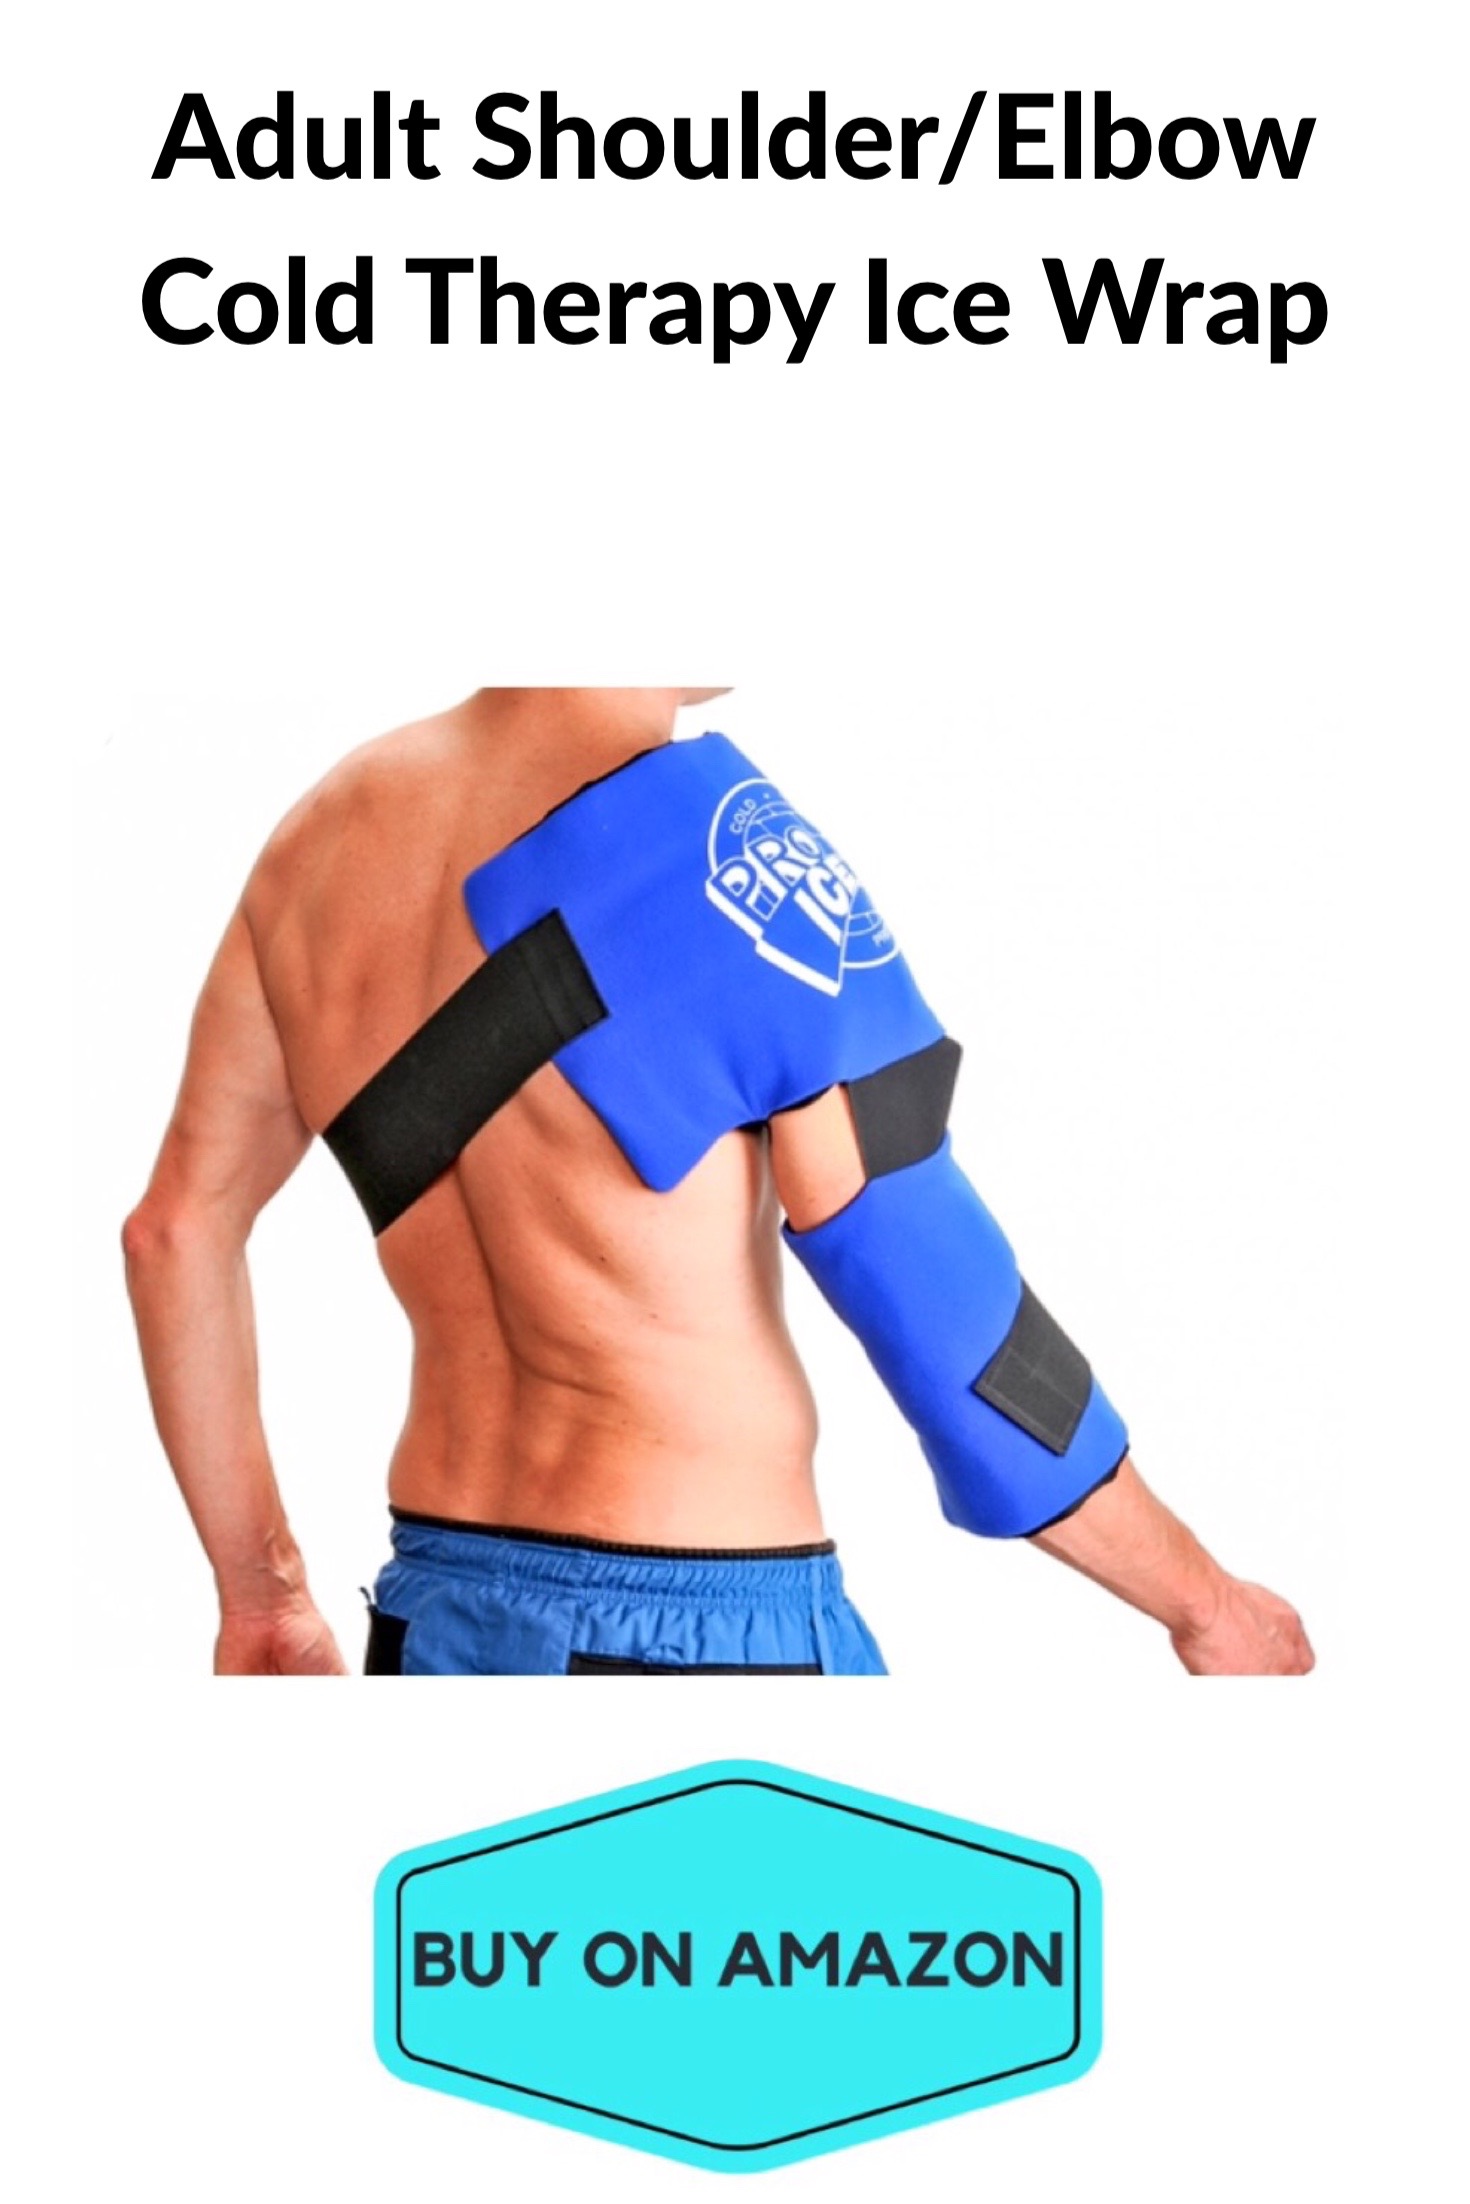 Adult Shoulder/Elbow Cold Therapy Ice Wrap